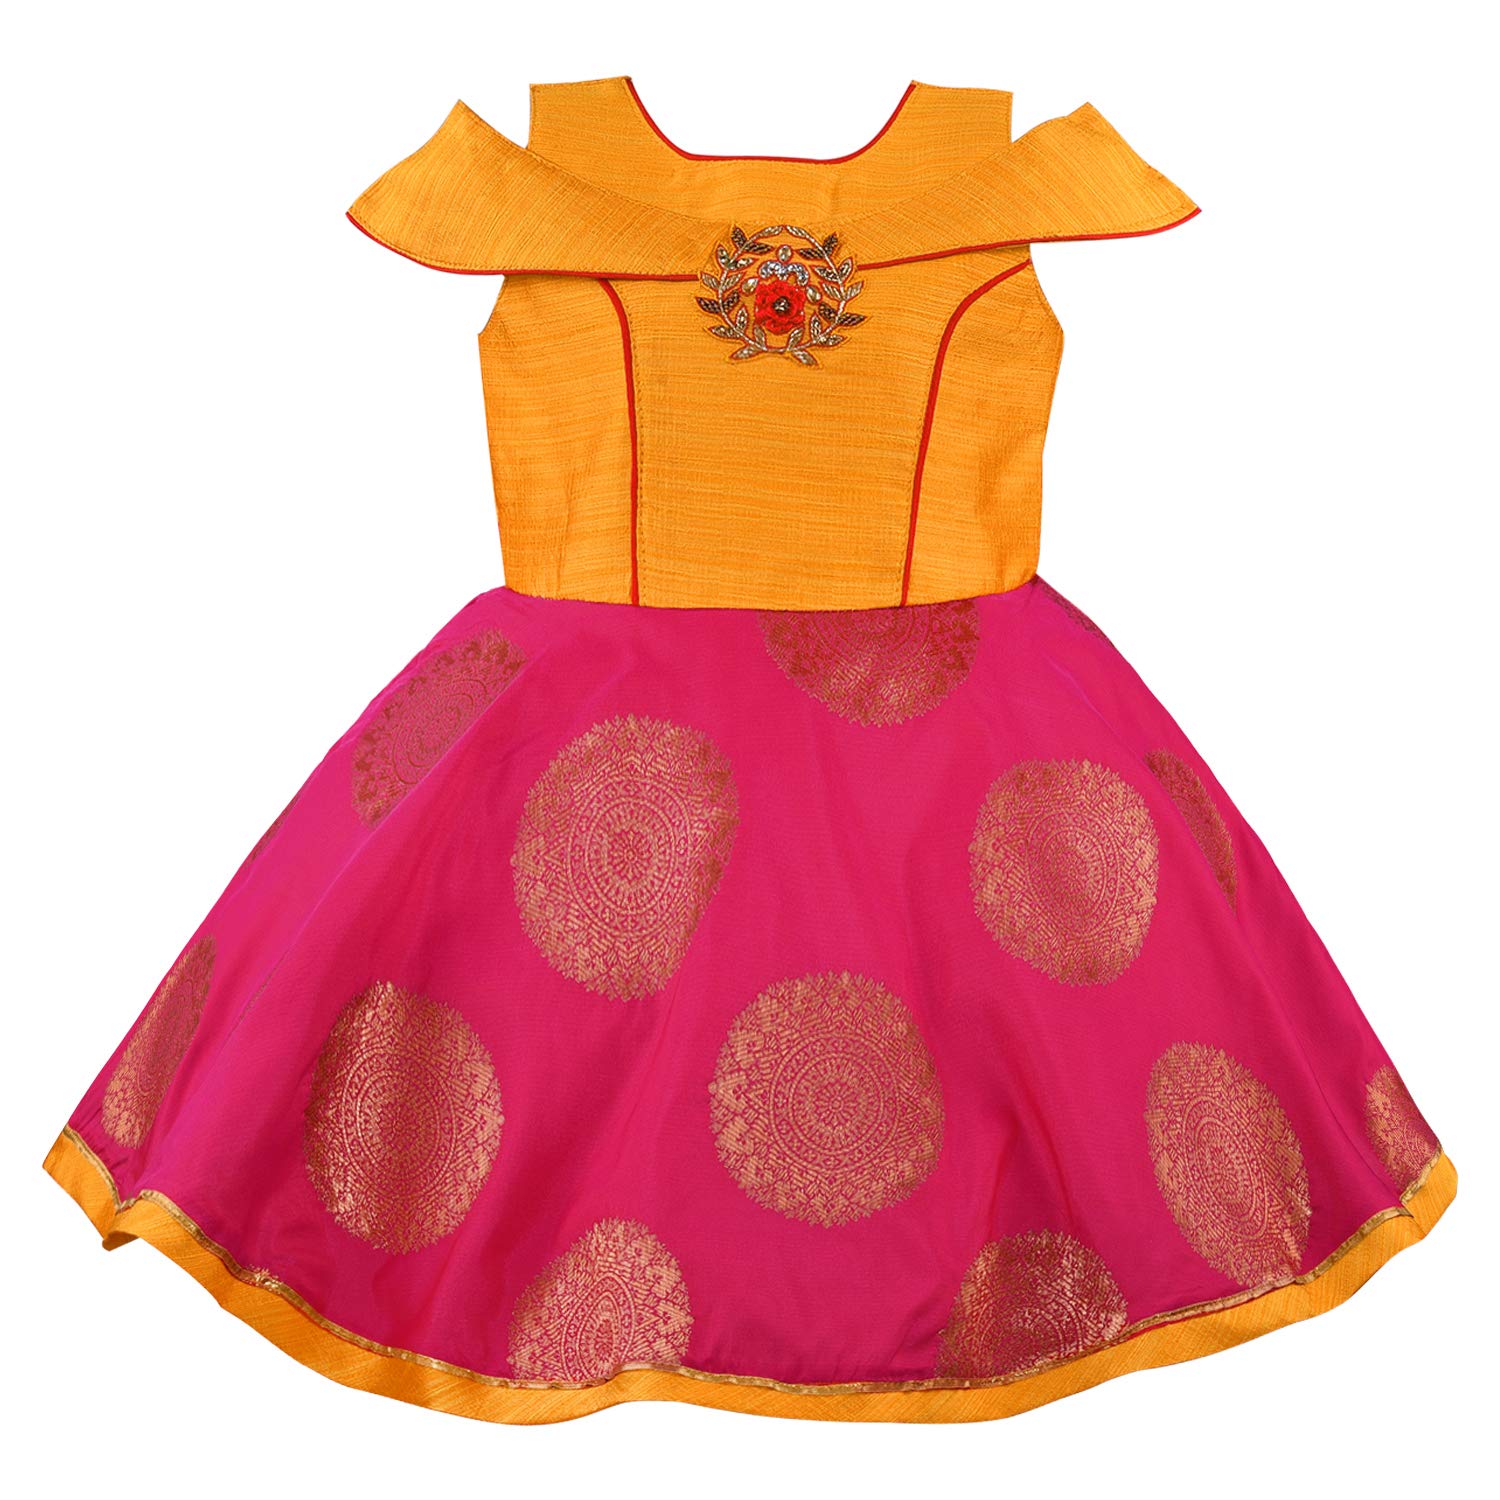 Baby Girls Party Wear Frock Birthday Dress For Girls  bxa241y - Wish Karo Party Wear - frocks Party Wear - baby dress